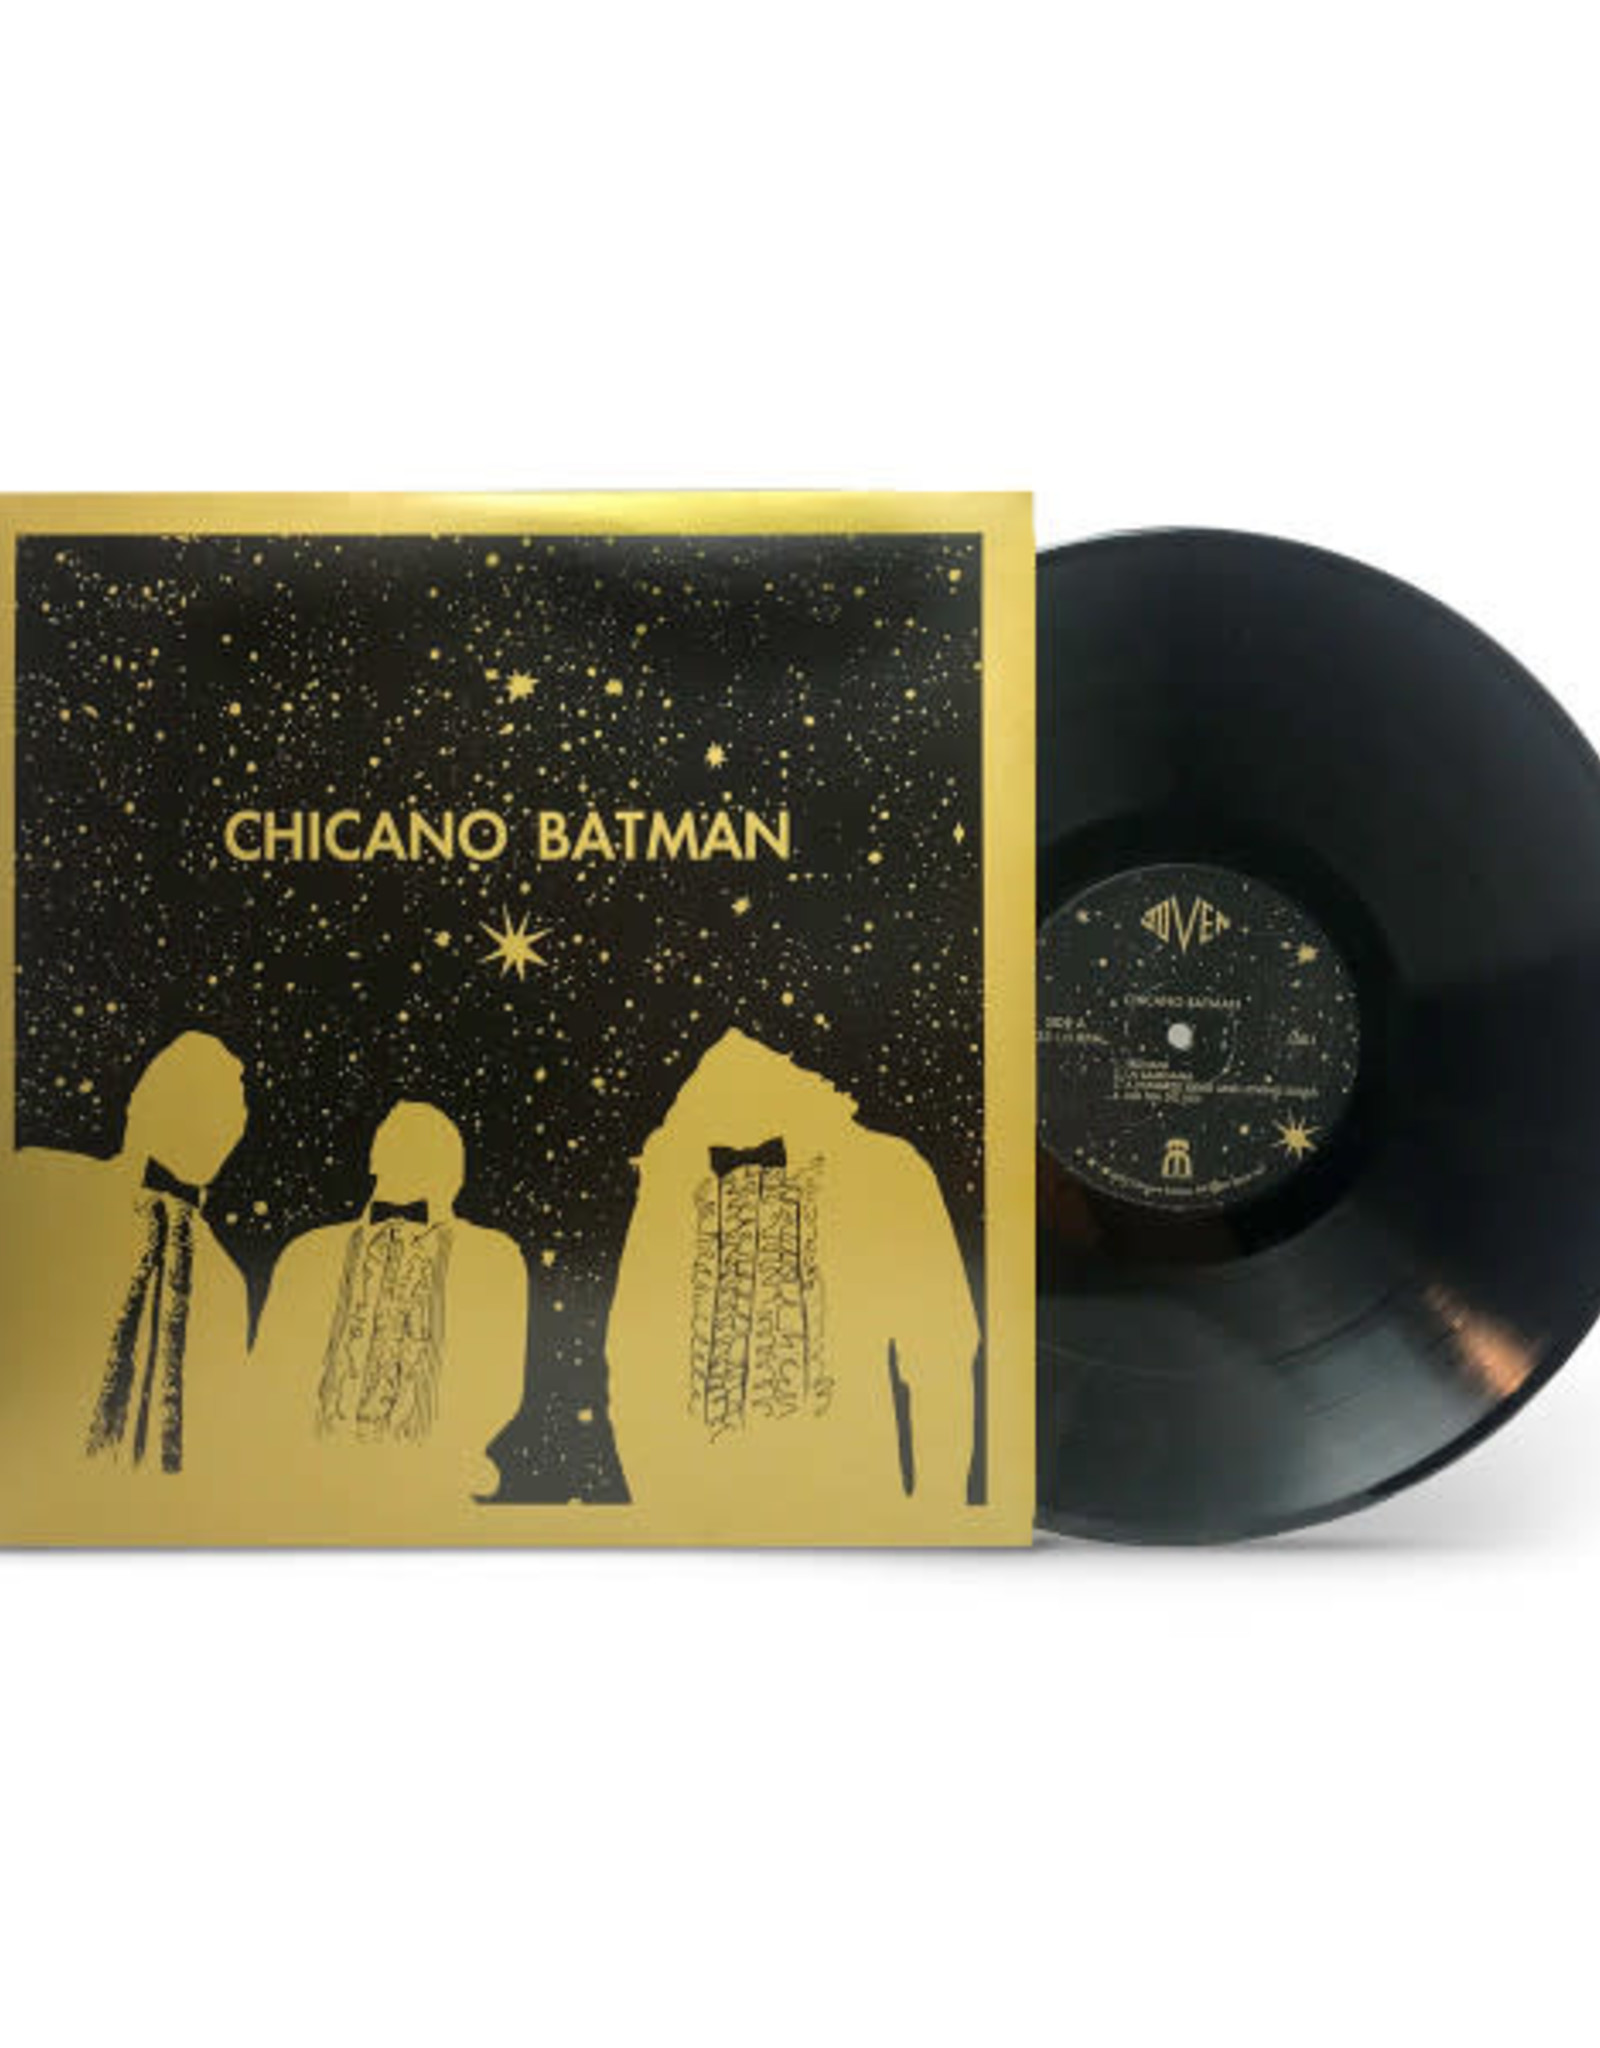 Chicano Batman- Self-Titled Debut Limited-Edition Gold Vinyl